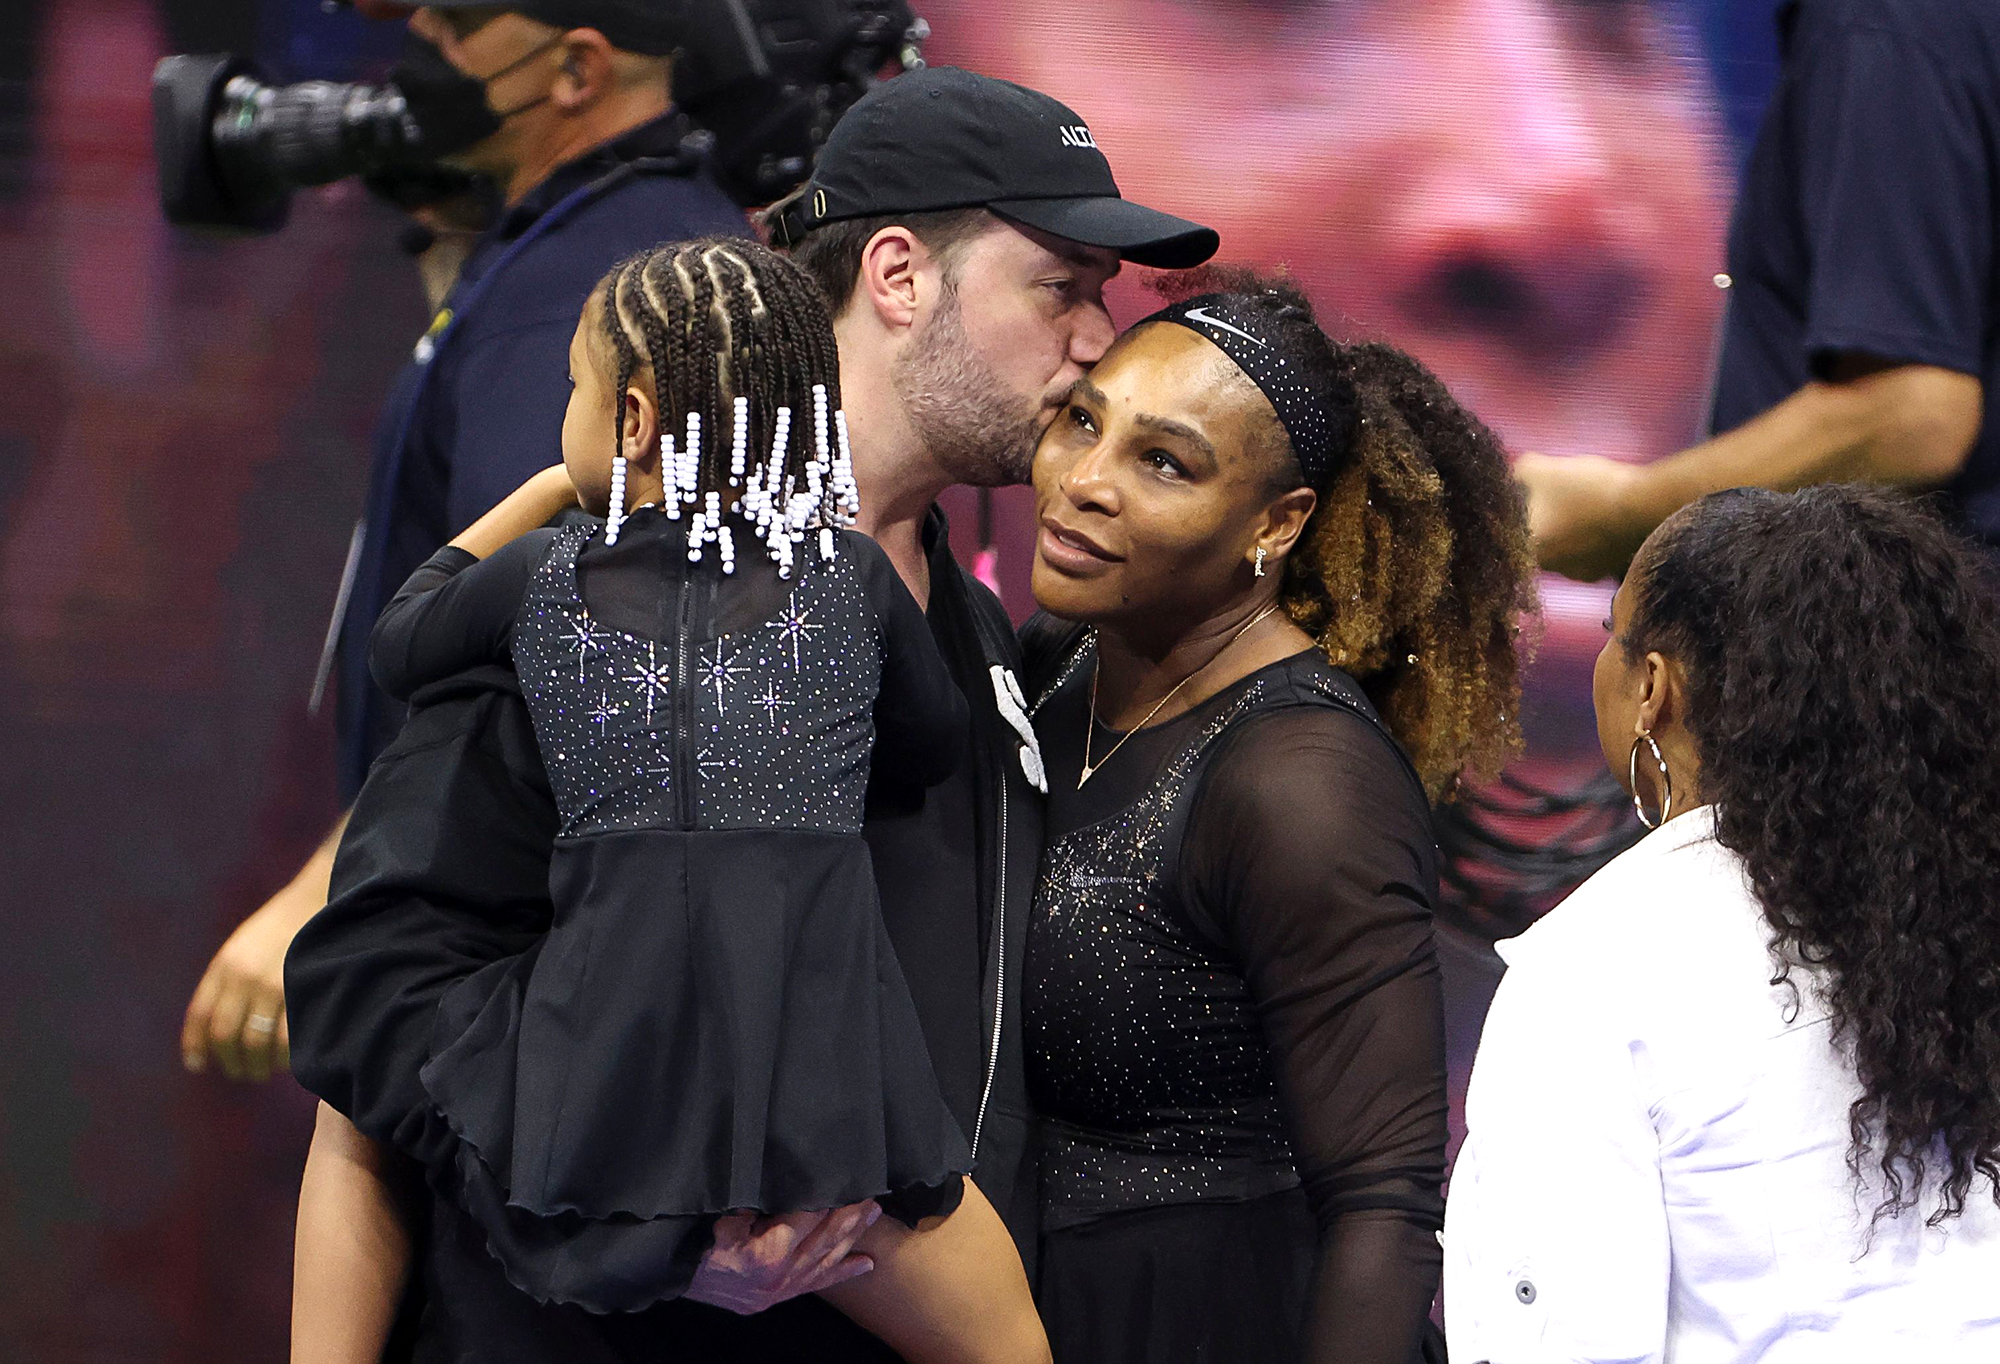 Serena Williams' husband Alexis Ohanian gushes over their daughter Olympia  on her 5th birthday